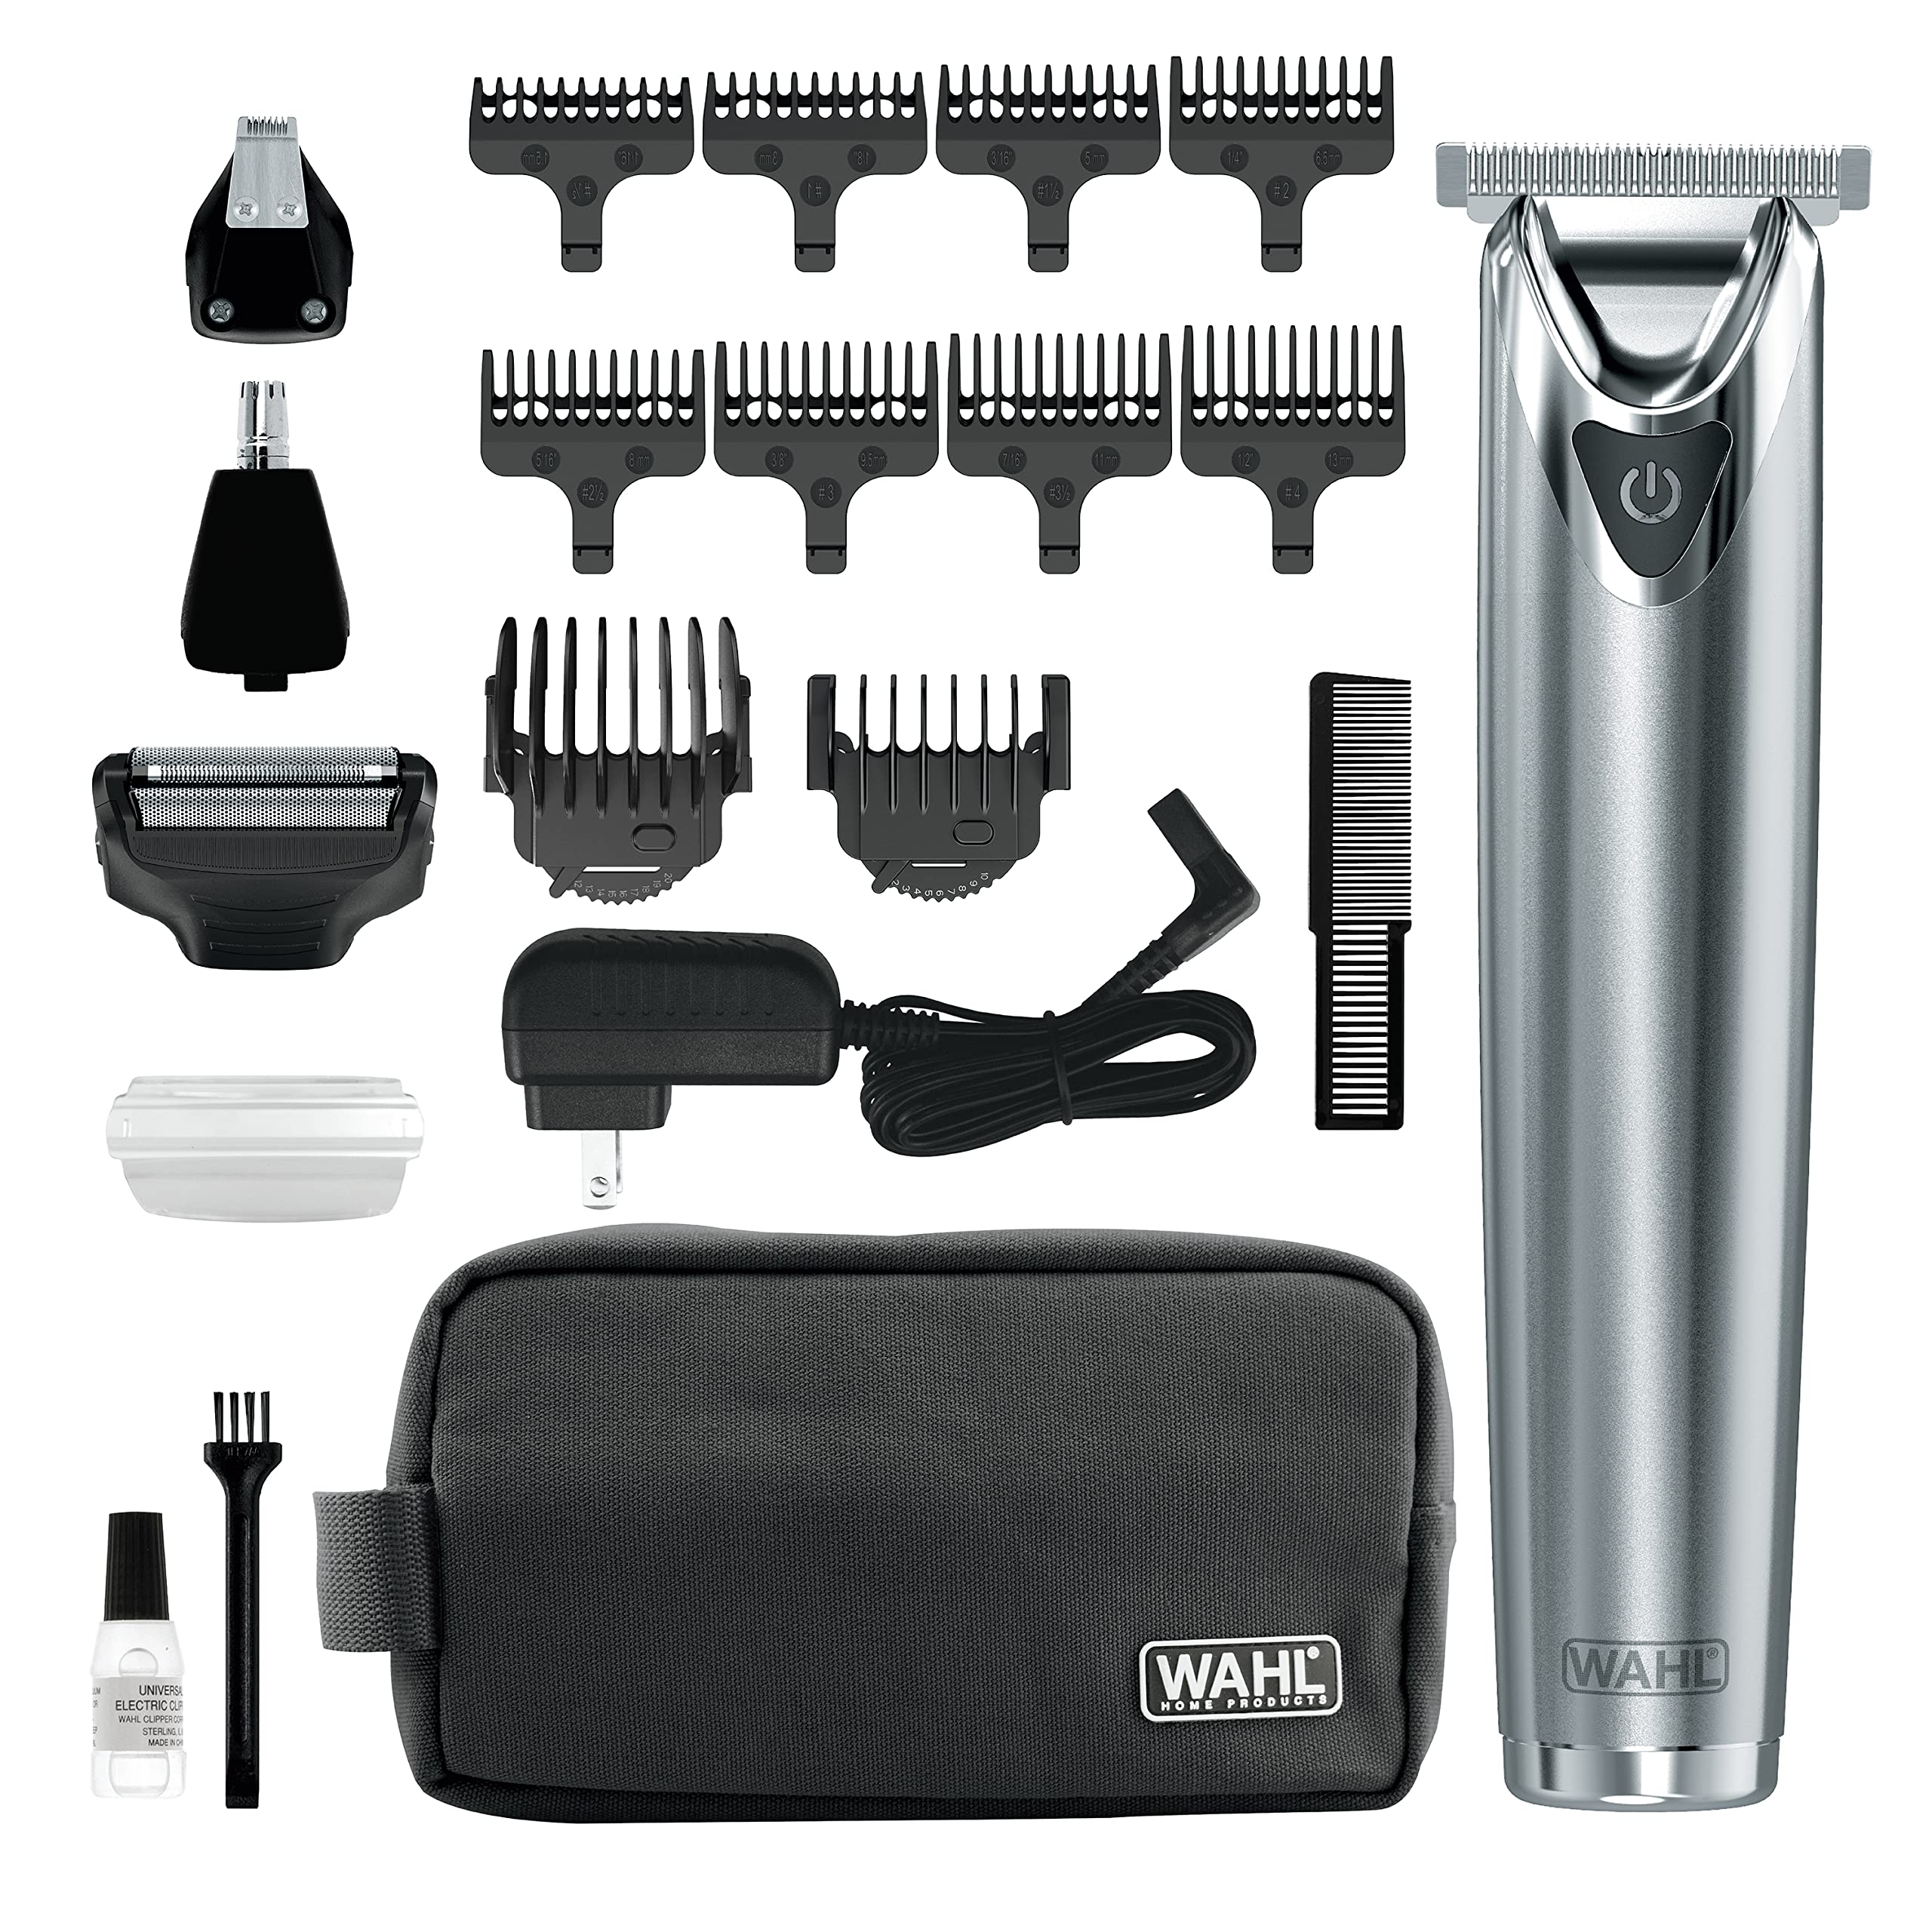 Wahl USA Stainless Steel Lithium Ion 2.0+ Beard Trimmer for Men - Electric Shaver & Nose Ear Trimmer - Rechargeable All in One Men's Grooming Kit - Model 9864SS